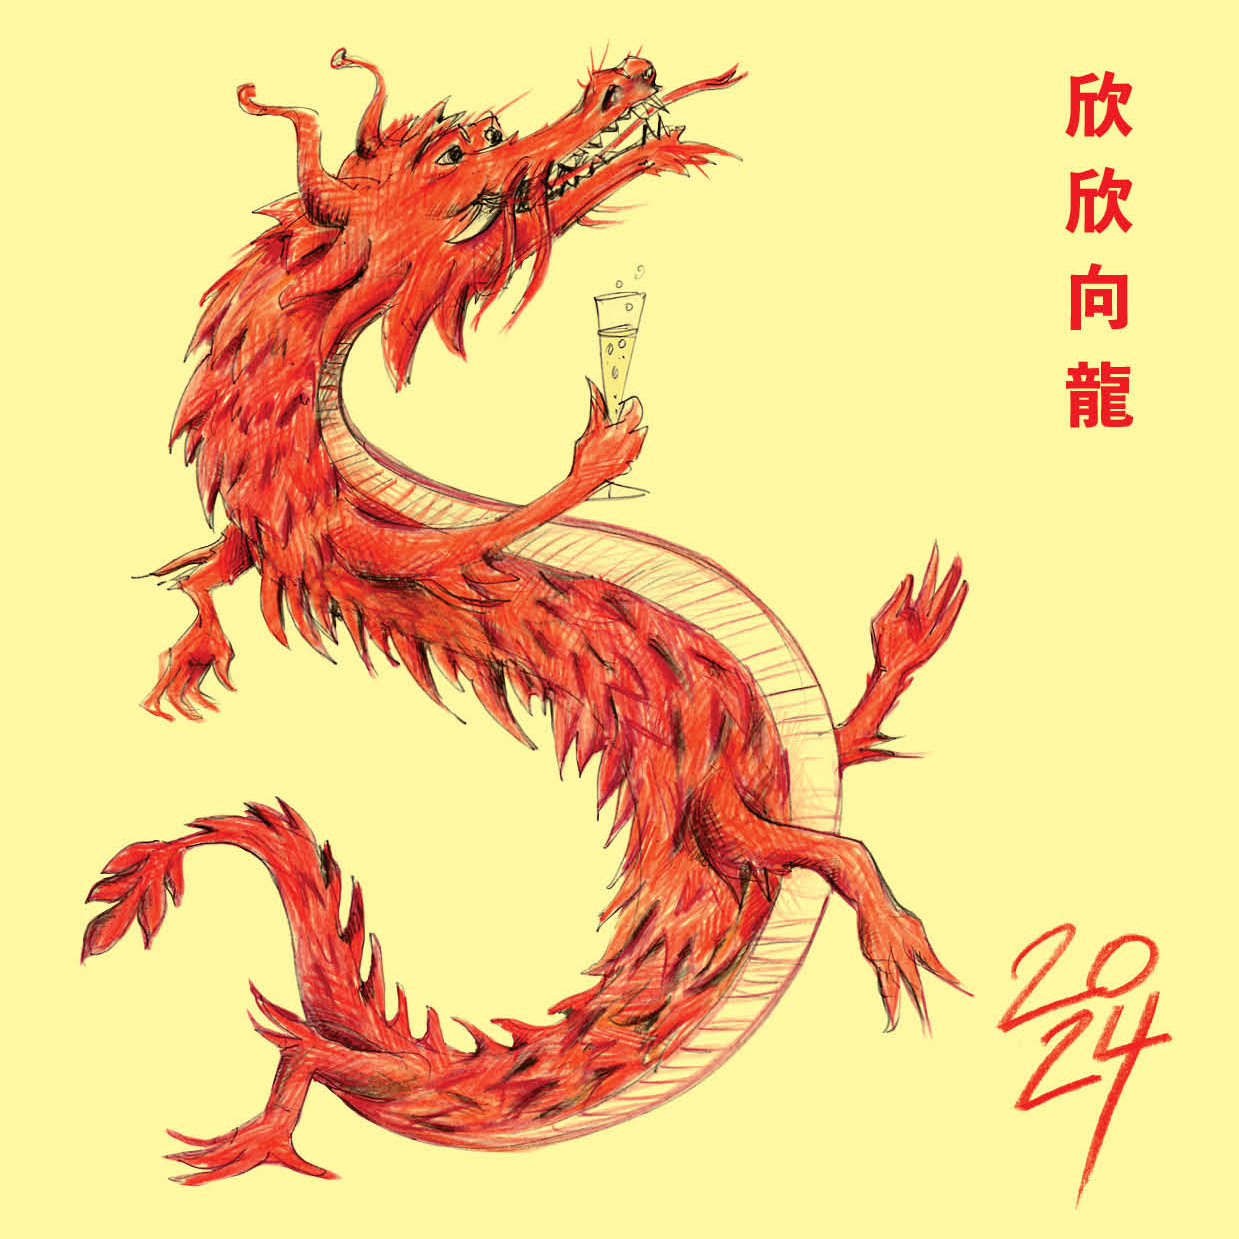 Illustration Year of the Dragon 2024 Lex Weyer designer Luxembourg for trade office in Taipee Taiwan